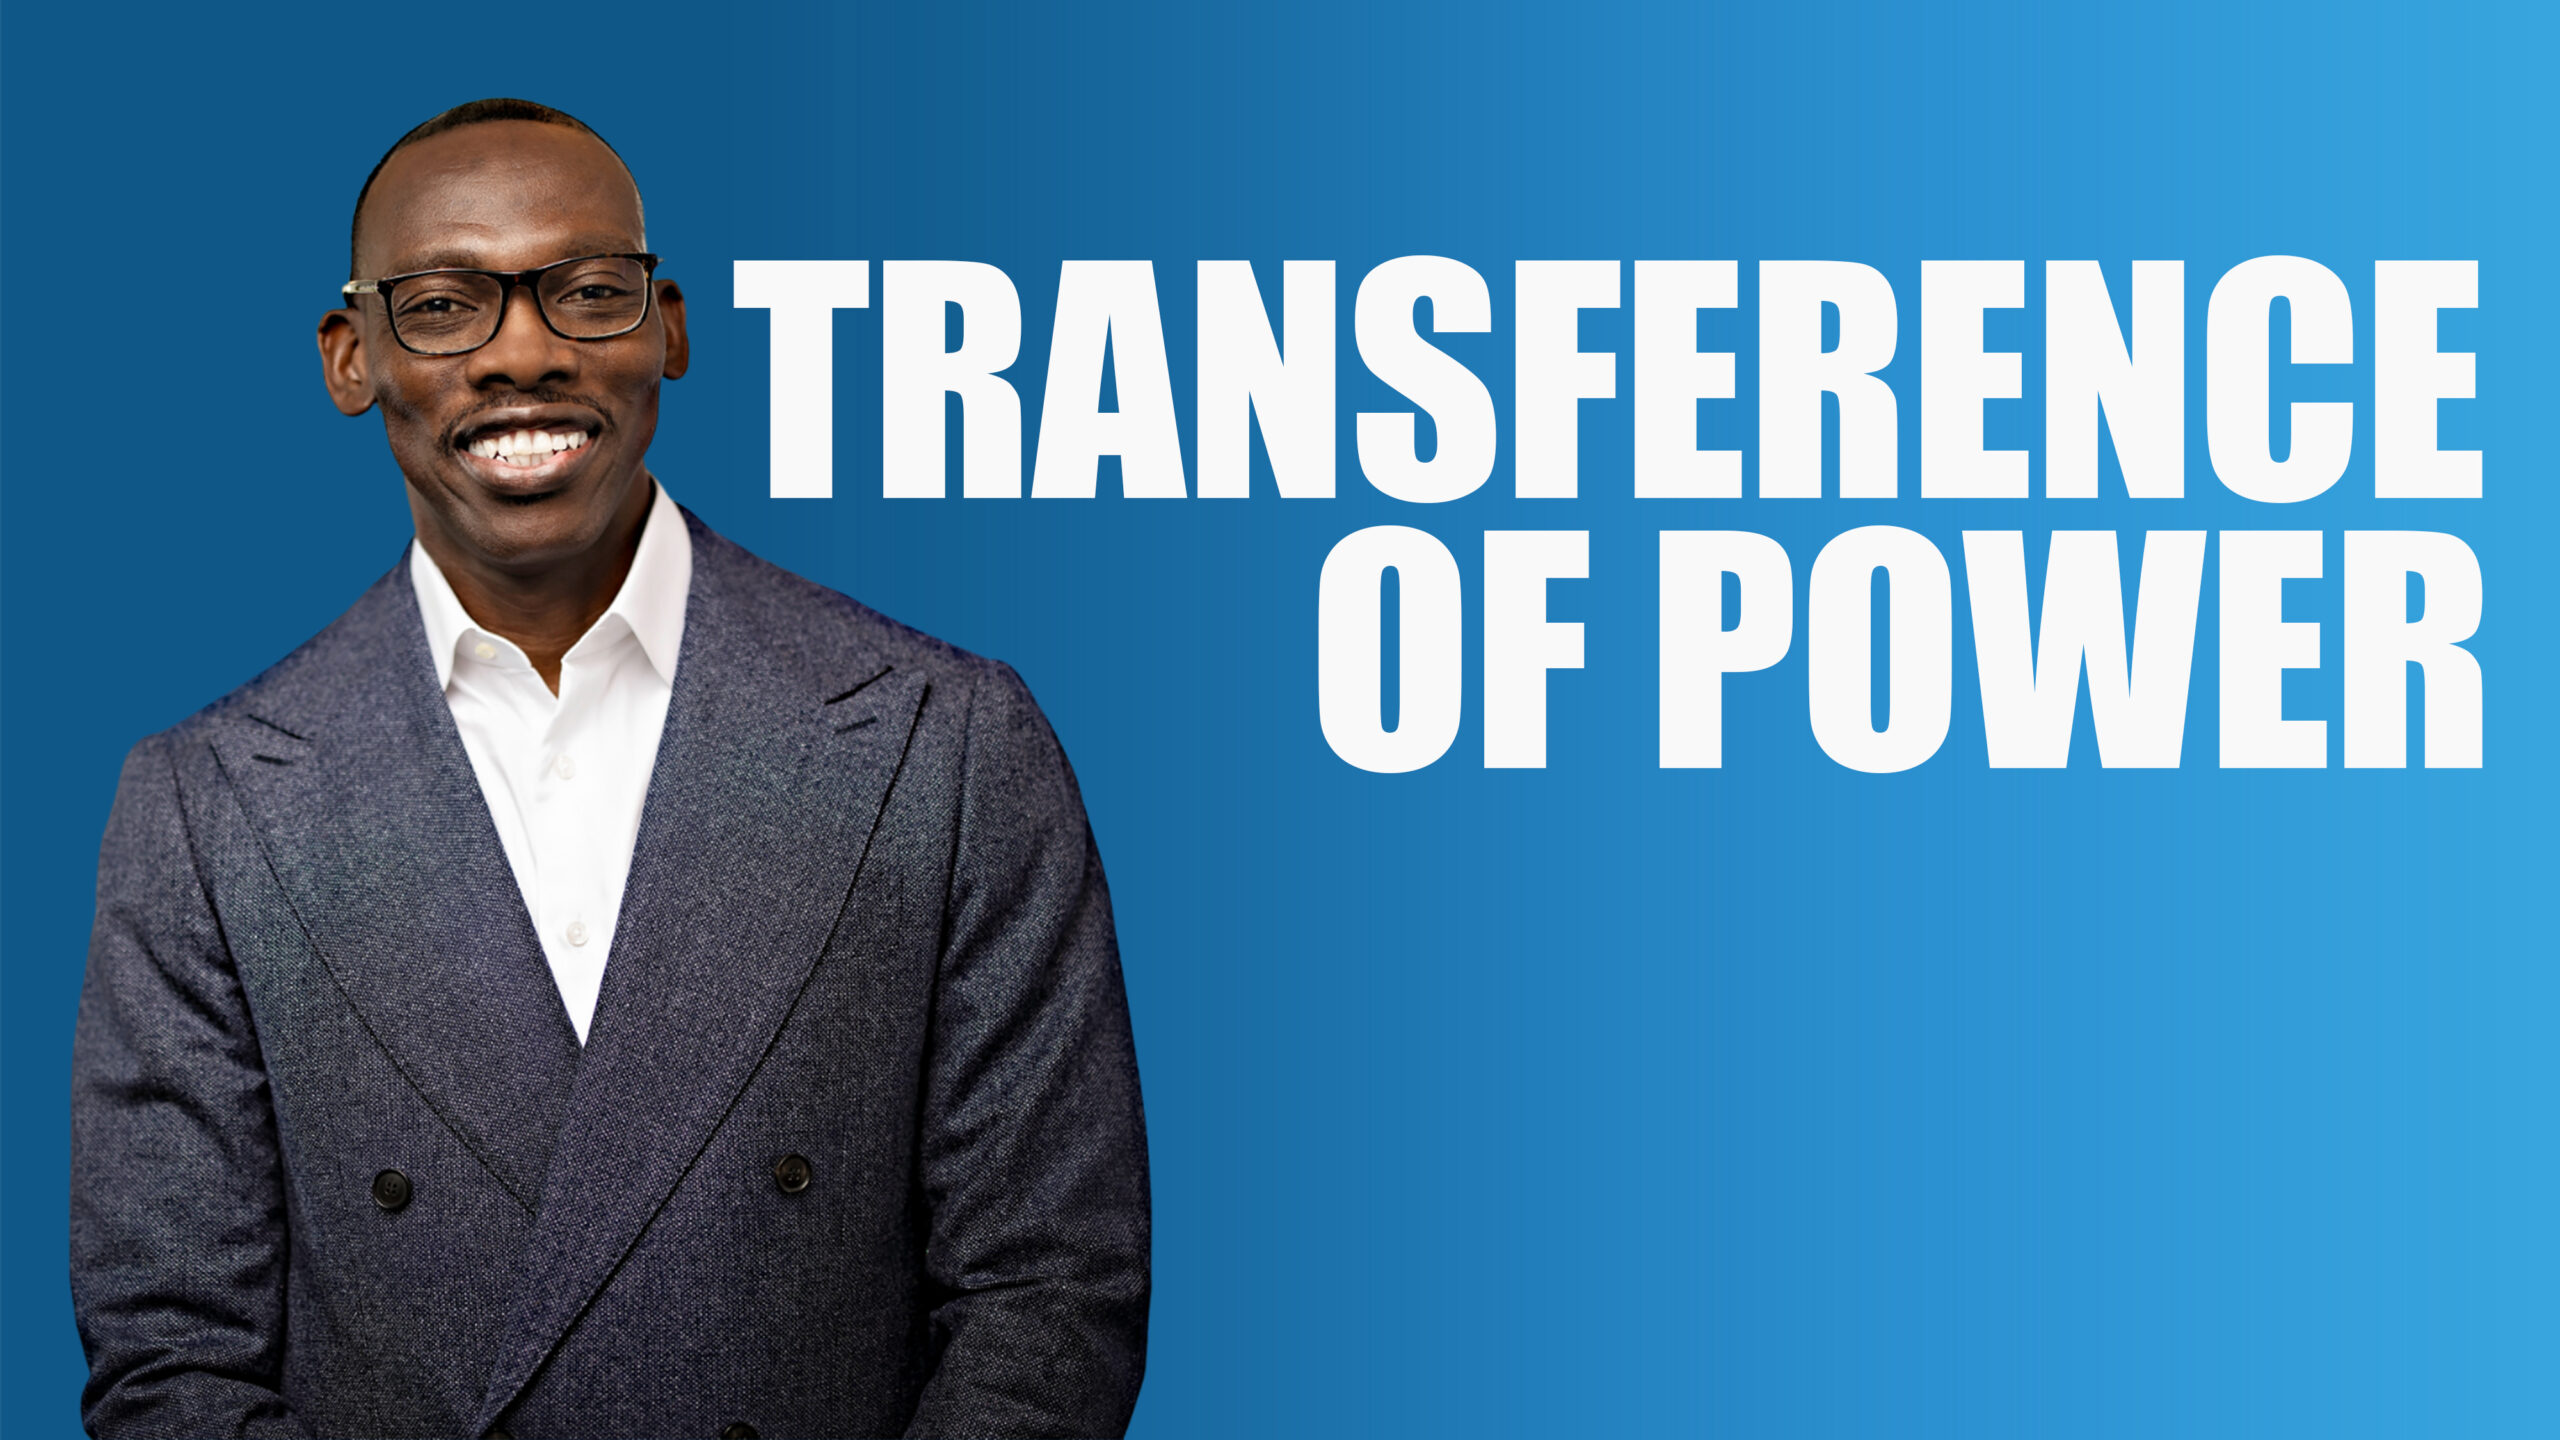 Transference Of Power